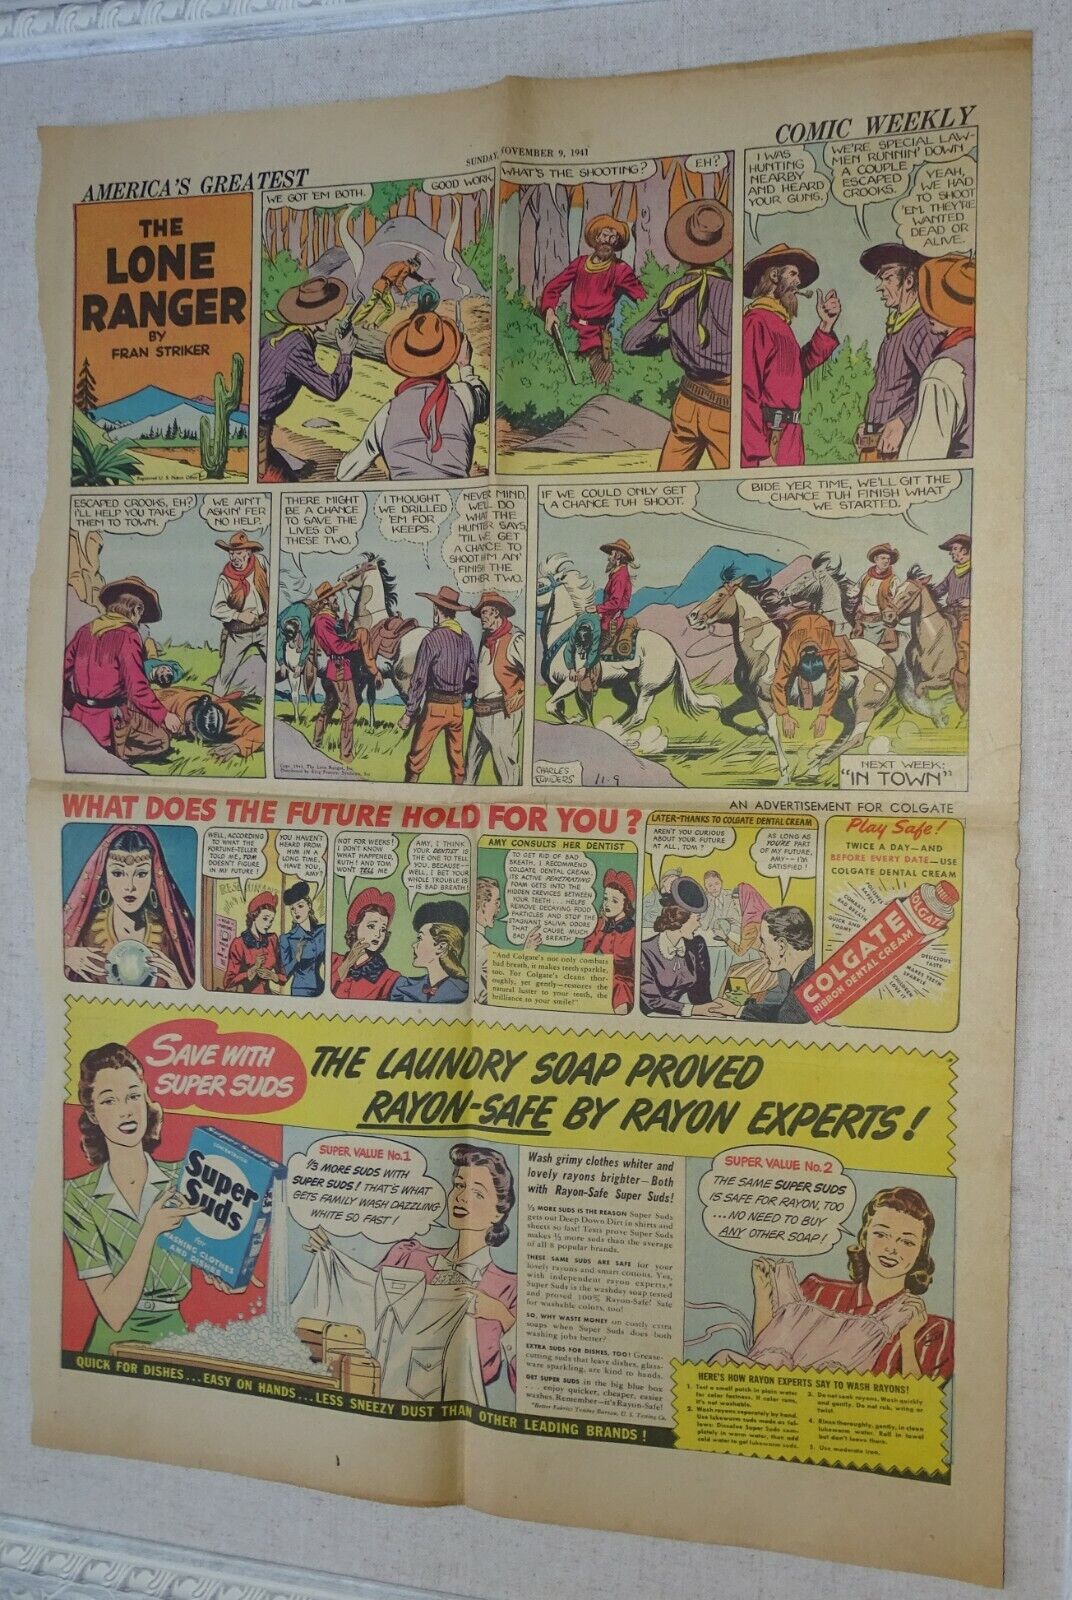 1941 Lone Ranger Comic Strip Color Page from a Boston Newspaper